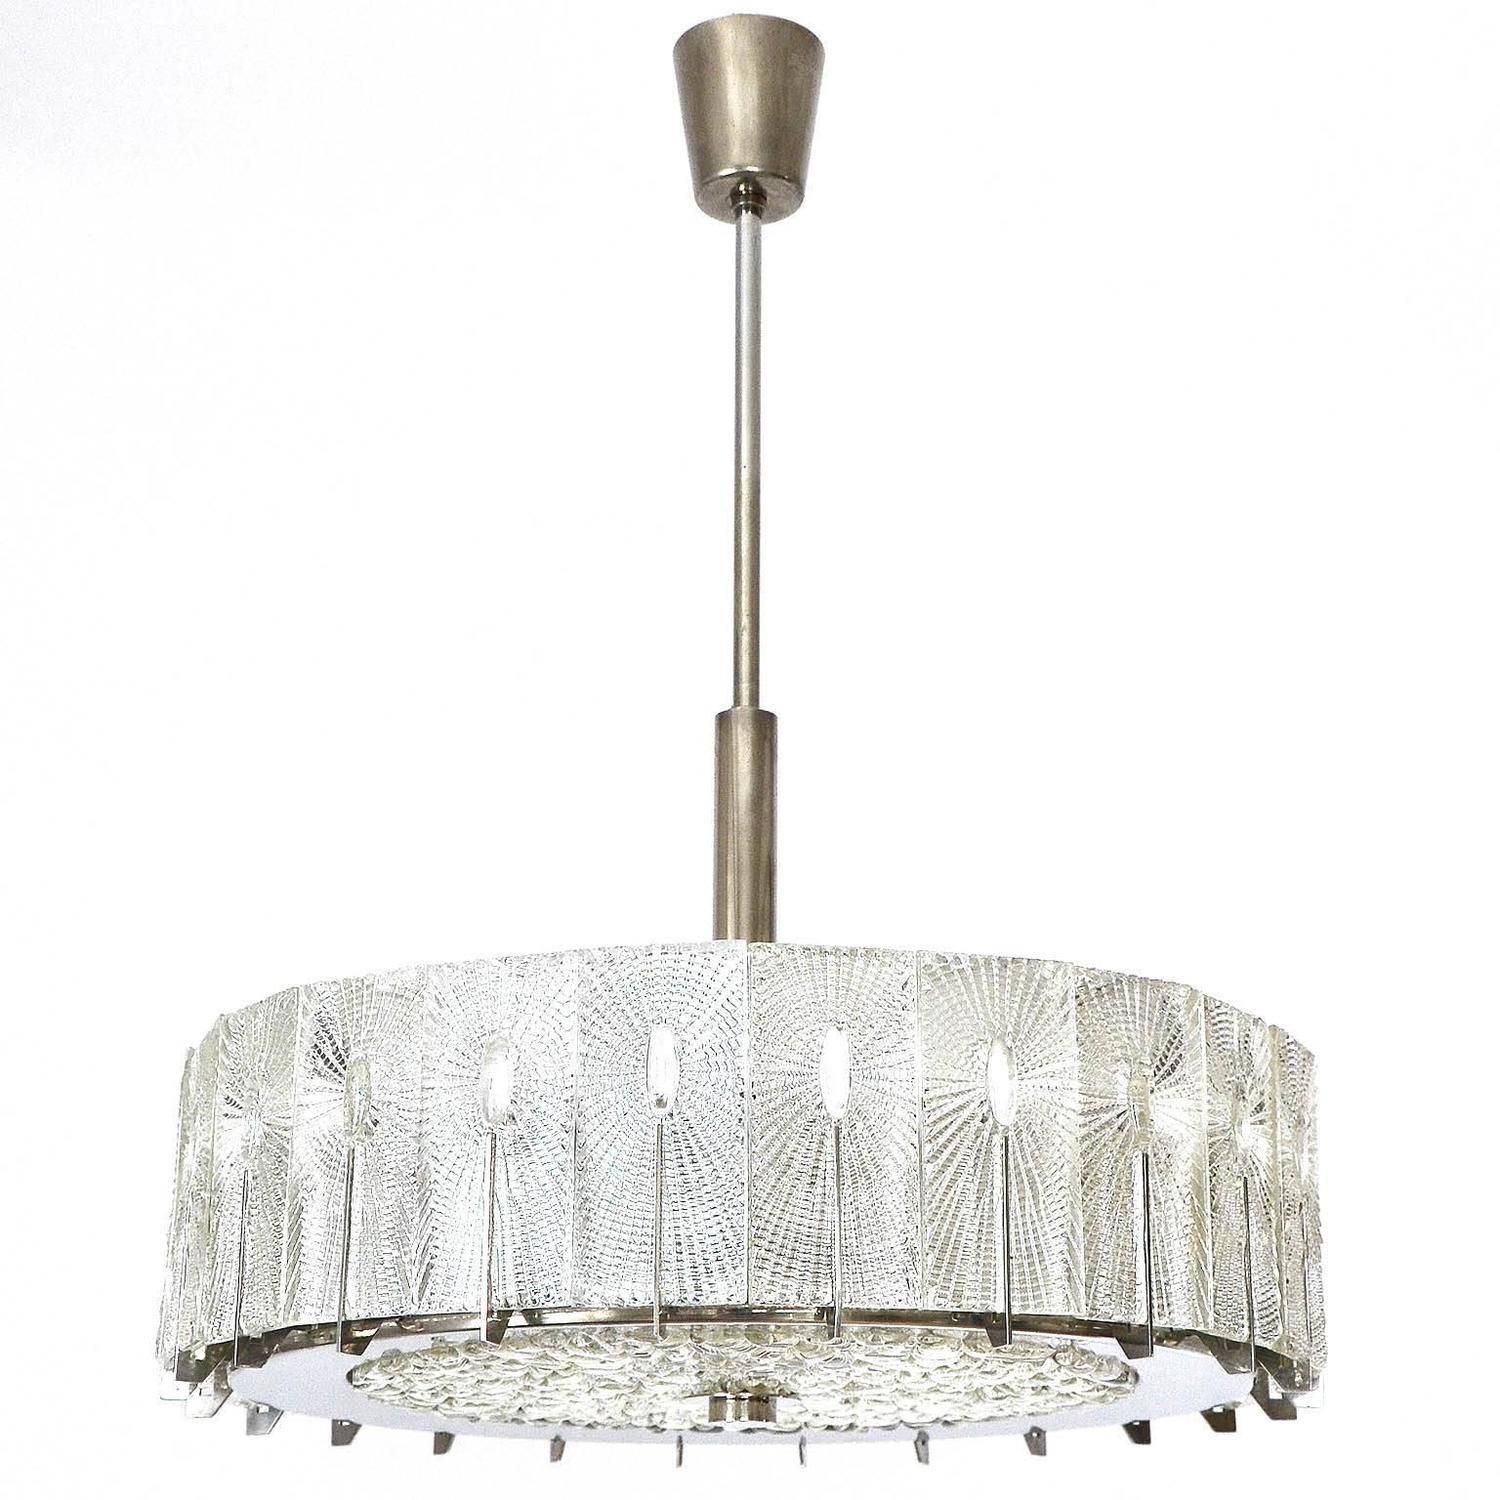 A beautiful textured glass and nickel (similar to chrome) light fixture by Rupert Nikoll, Austria, manufactured in midcentury, circa 1960 (late 1950s or early 1960s).
The lamp has been refurbished and it is in very good condition. Nickel parts have